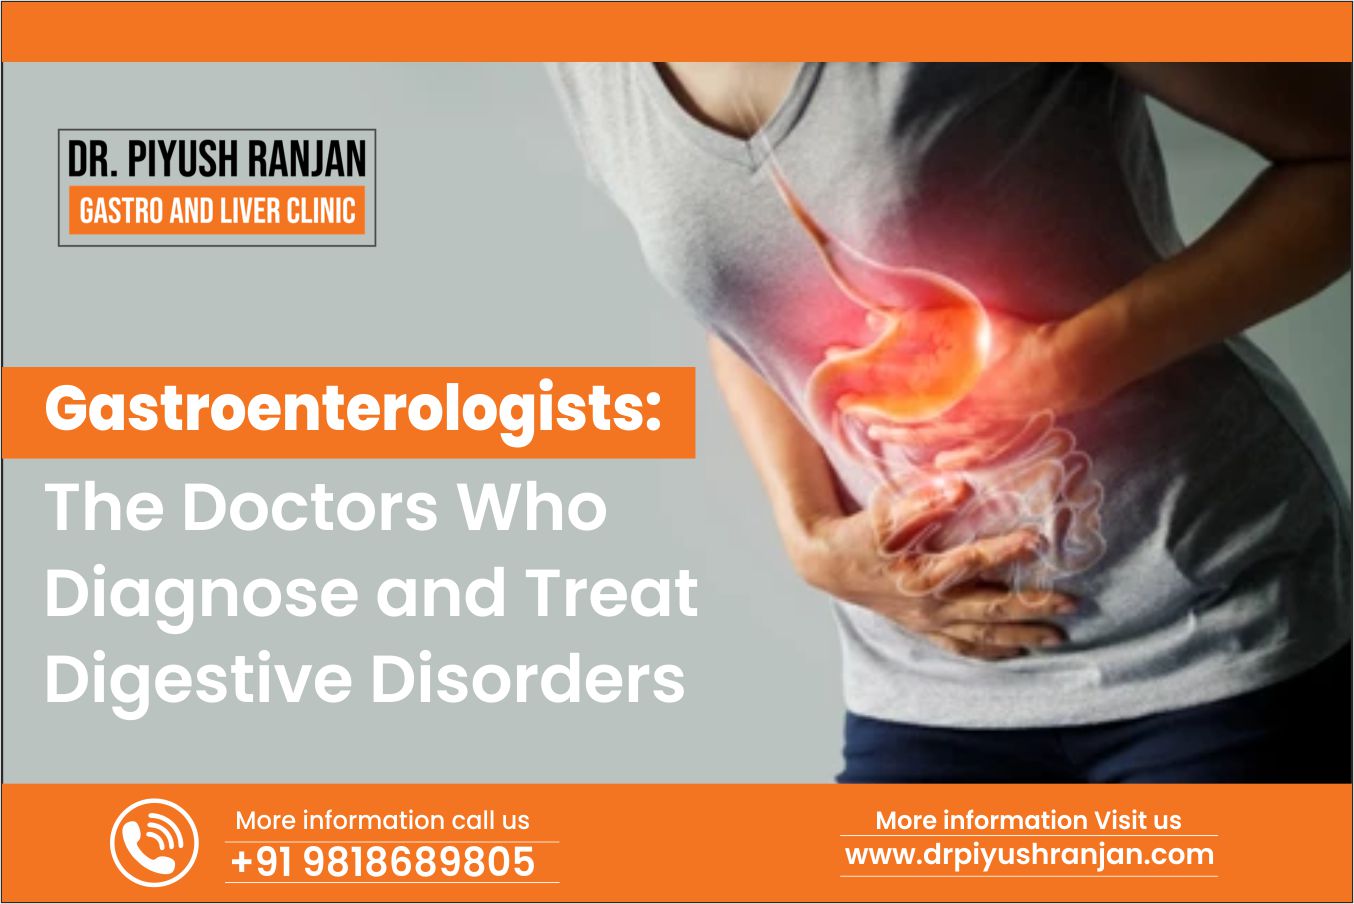 You are currently viewing Gastroenterologists: The Doctors Who Diagnose and Treat Digestive Disorders